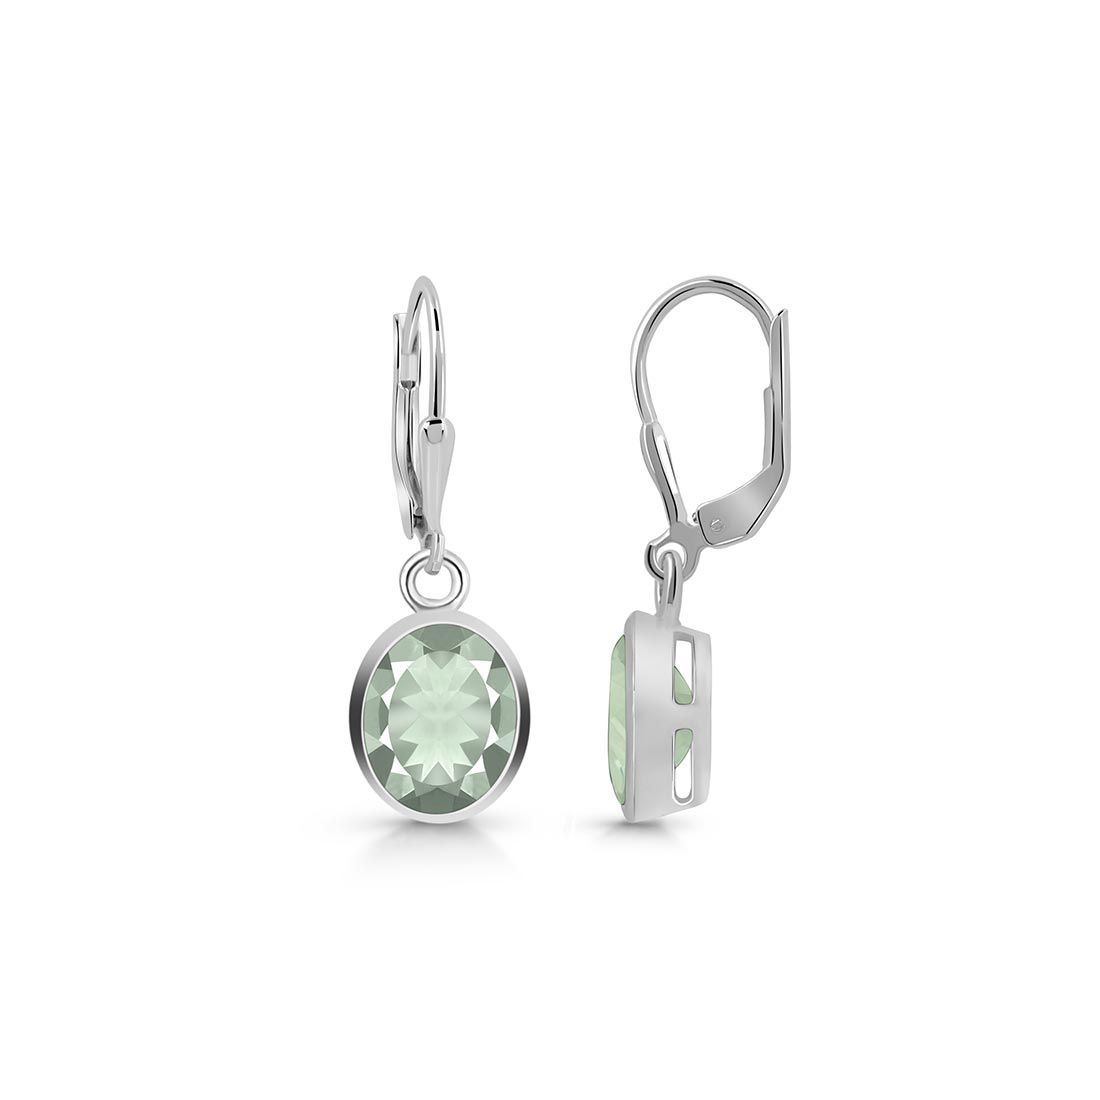 Green Amethyst Jewelry: A Shining Gemstone for Natural Style